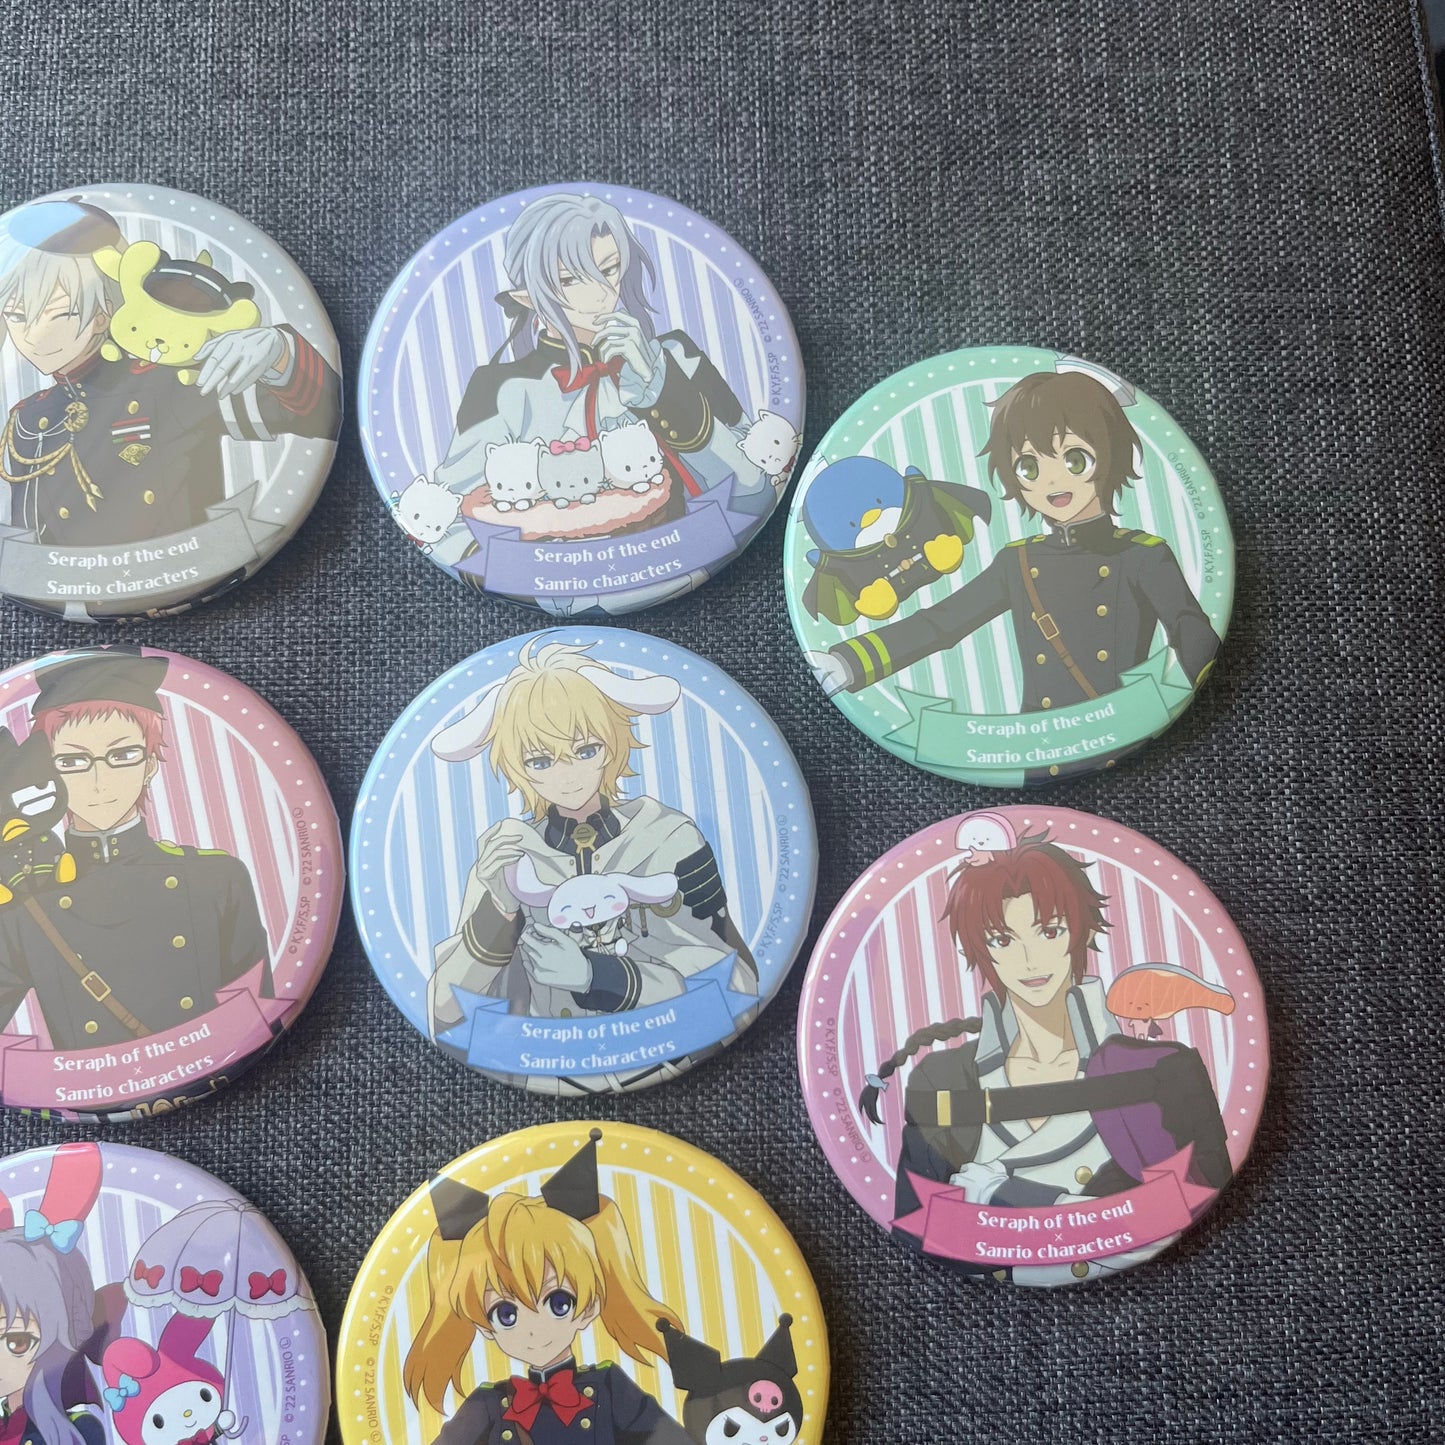 Seraph Of The End x Sanrio Badges